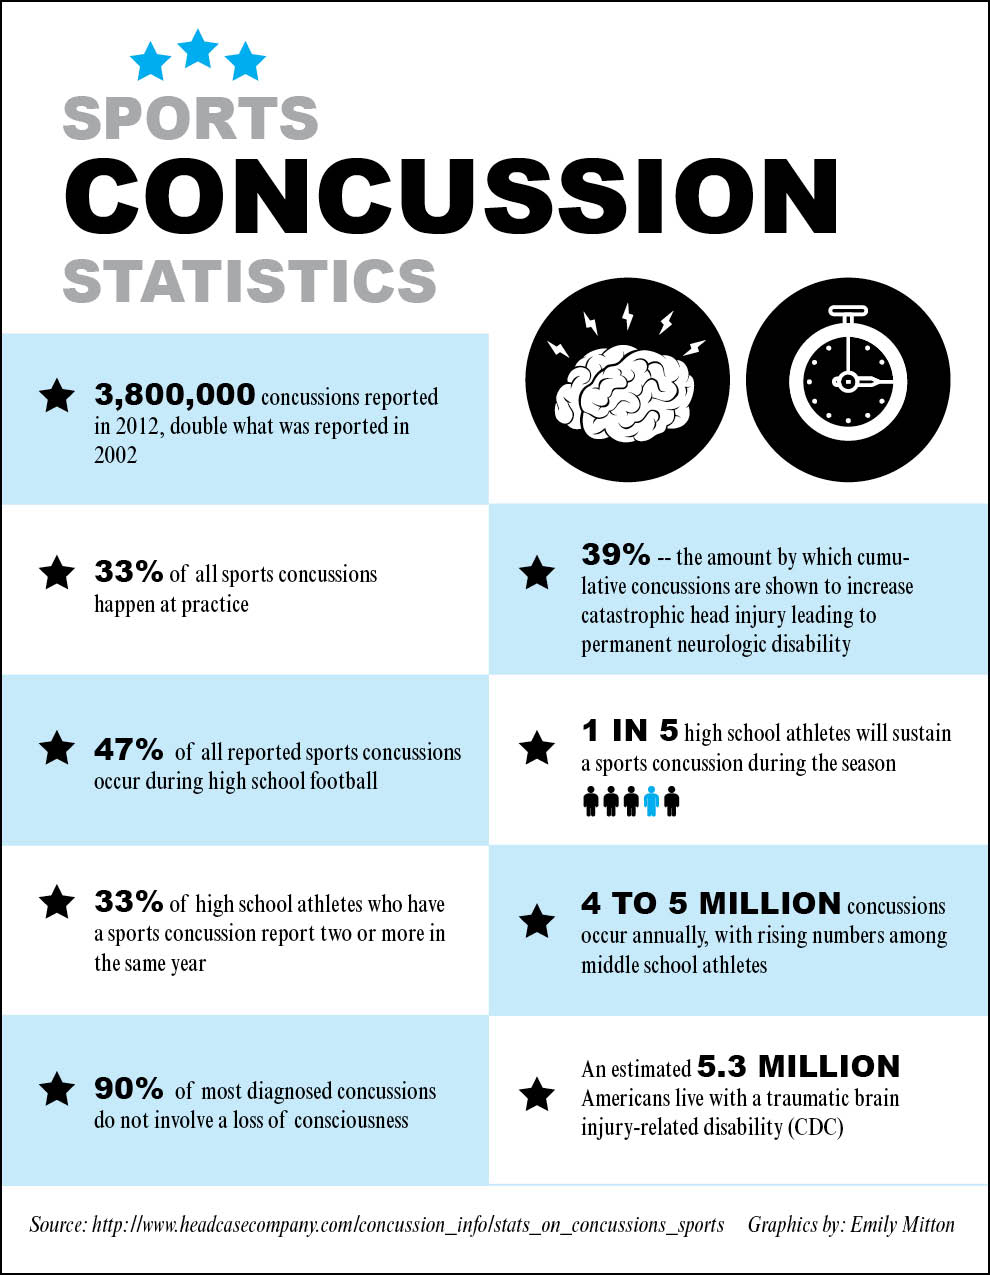 nhl concussions per year